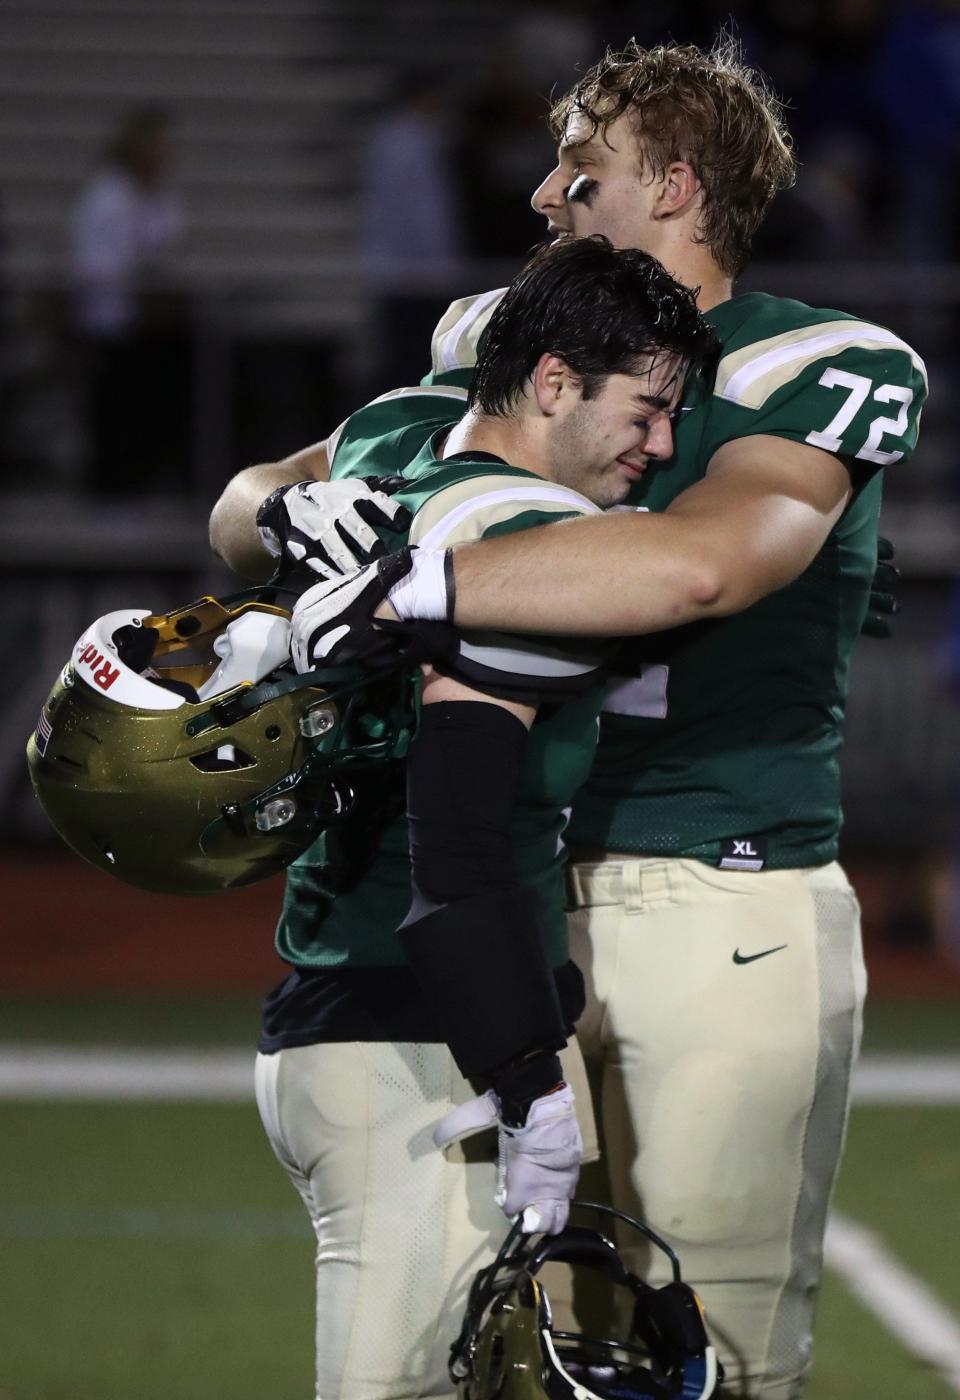 Dublin Jerome's Dane Wleklinski (72) consoles teammate Mike Smith (3) following a 28-14 loss to Olentangy Liberty in an OHSAA Division I Quarterfinal playoff game Nov. 4 at Dublin Jerome High School.